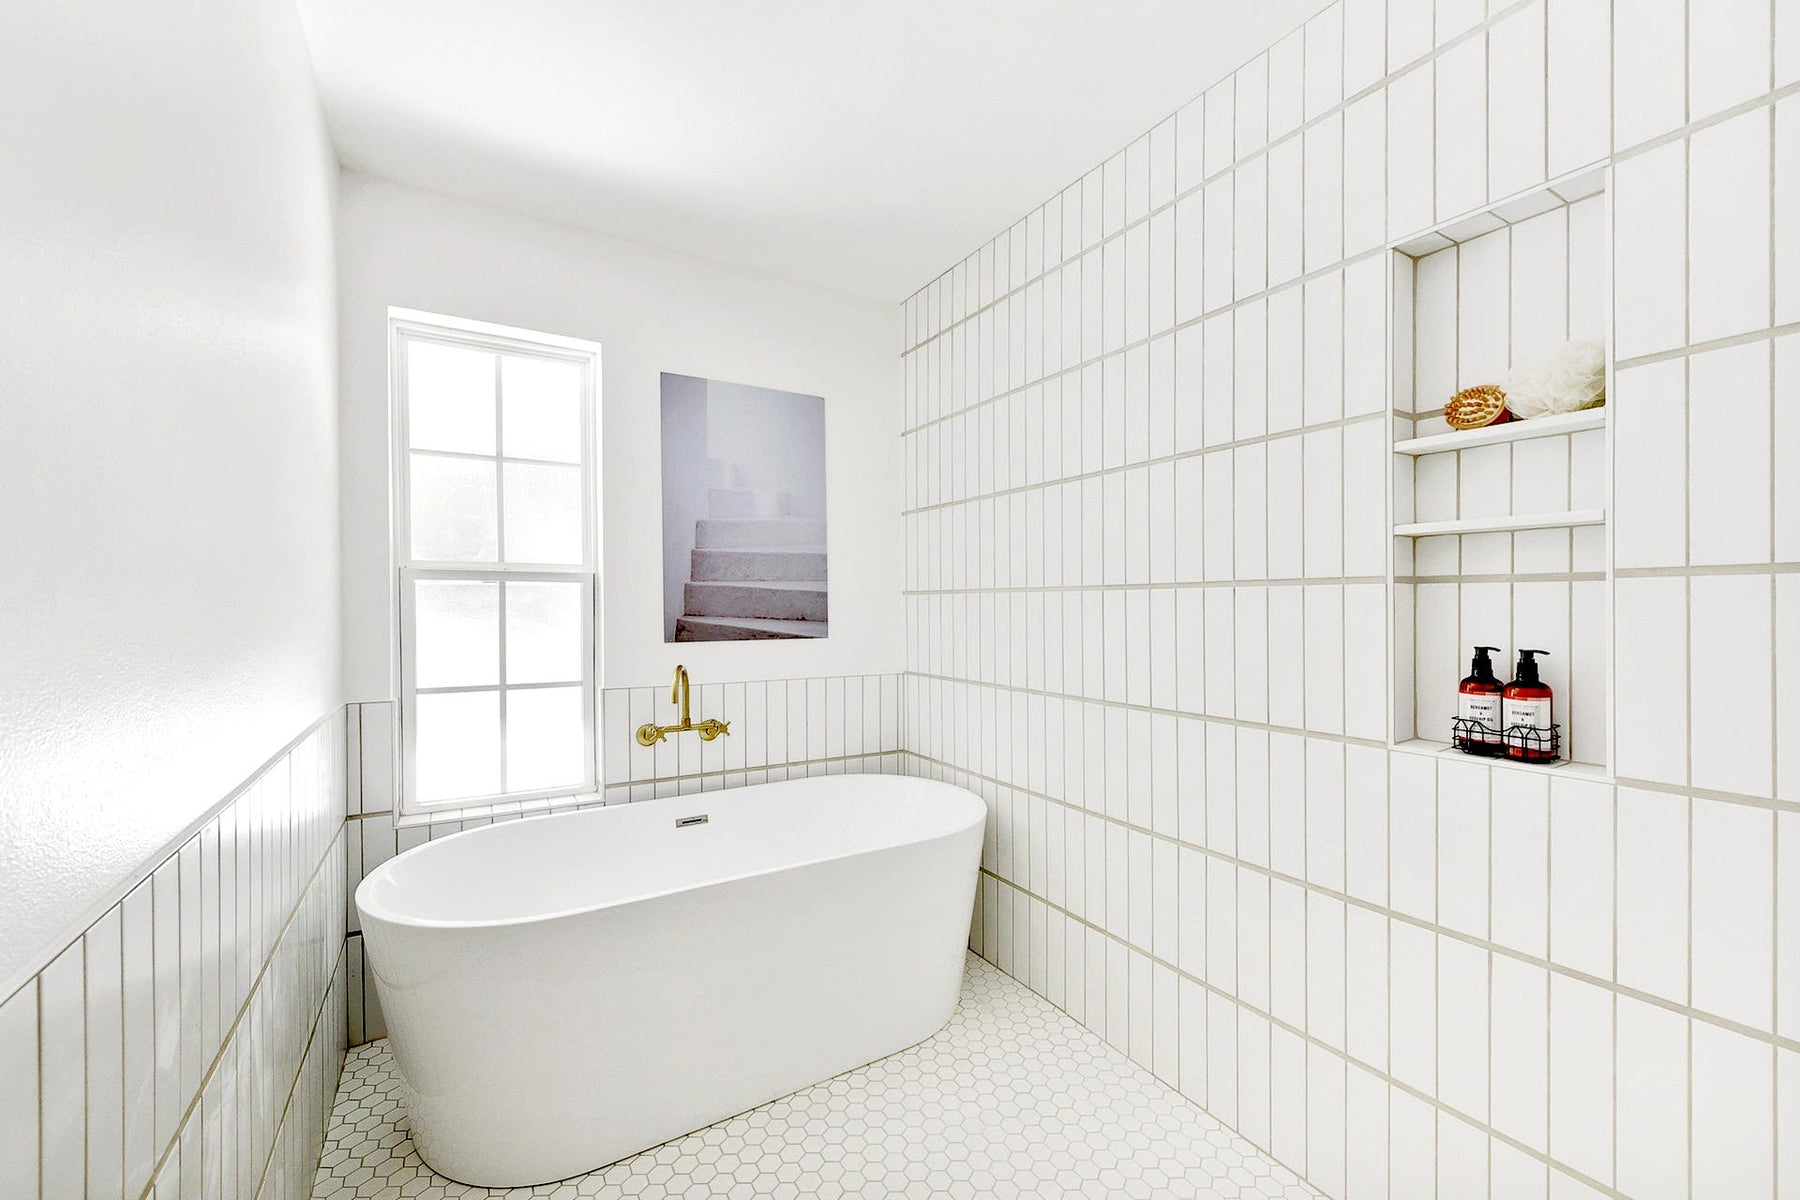 Tips for Trying the Tub-in-Shower Trend